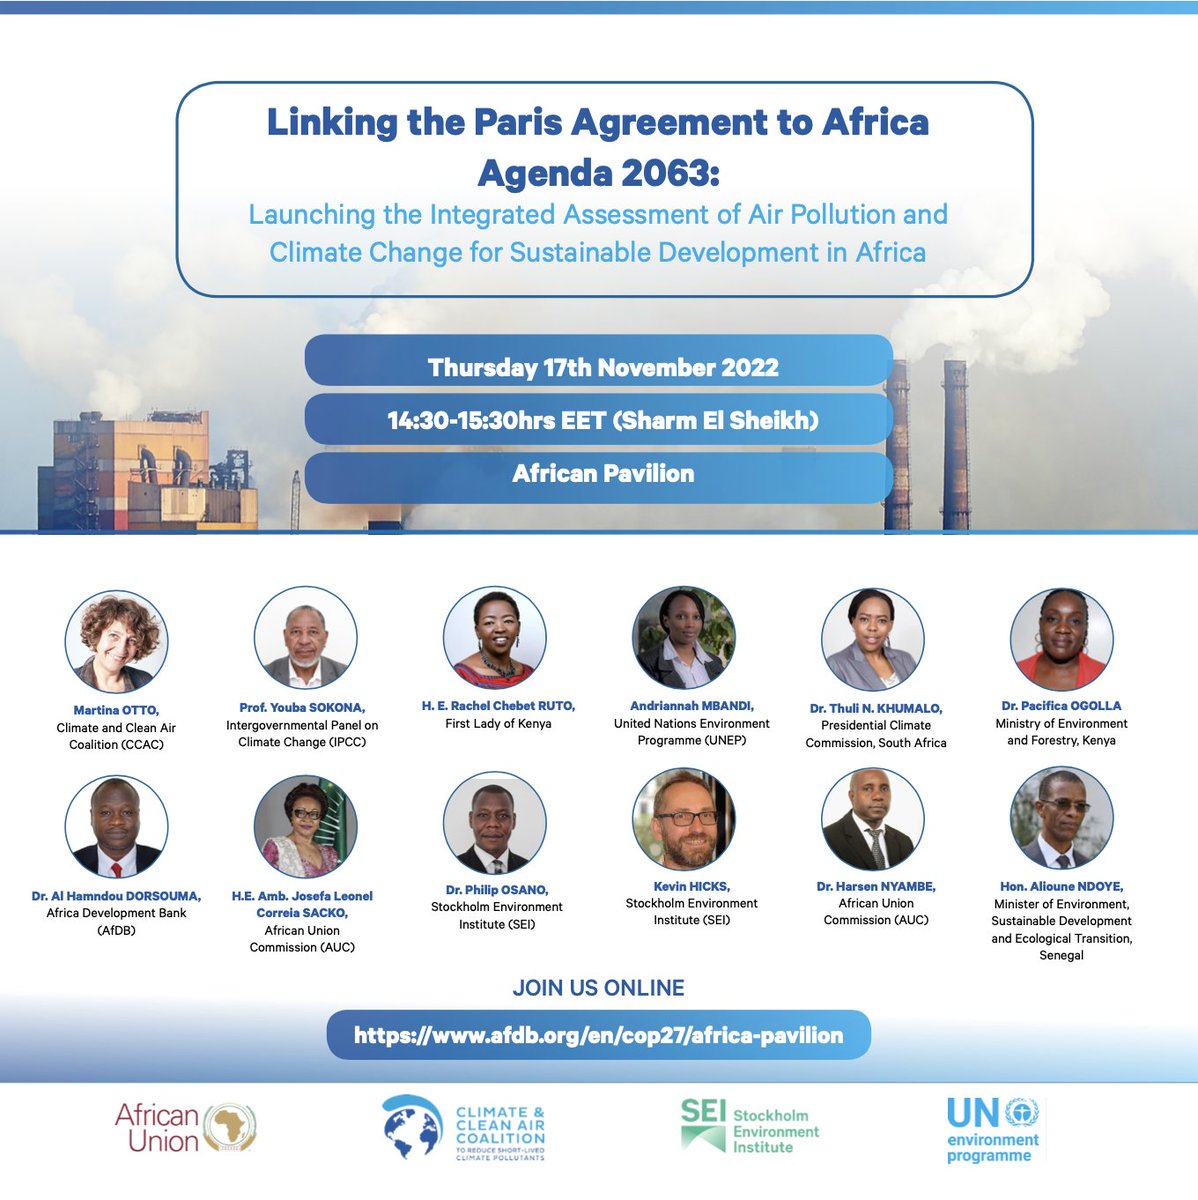 Join us today at #COP27! 🕝➡️14:30—15:30: Launch: Integrated Assessment of Air Pollution & Climate Change for Sustainable Development in Africa 📍Africa Pavilion 🎙️@MartinaOtto @FirstLadyKenya @AndriannahM @ThulieKM @JosefaSacko and more 🚨 Watch Live: cop27africapavilion.com/#/stage/main-s…